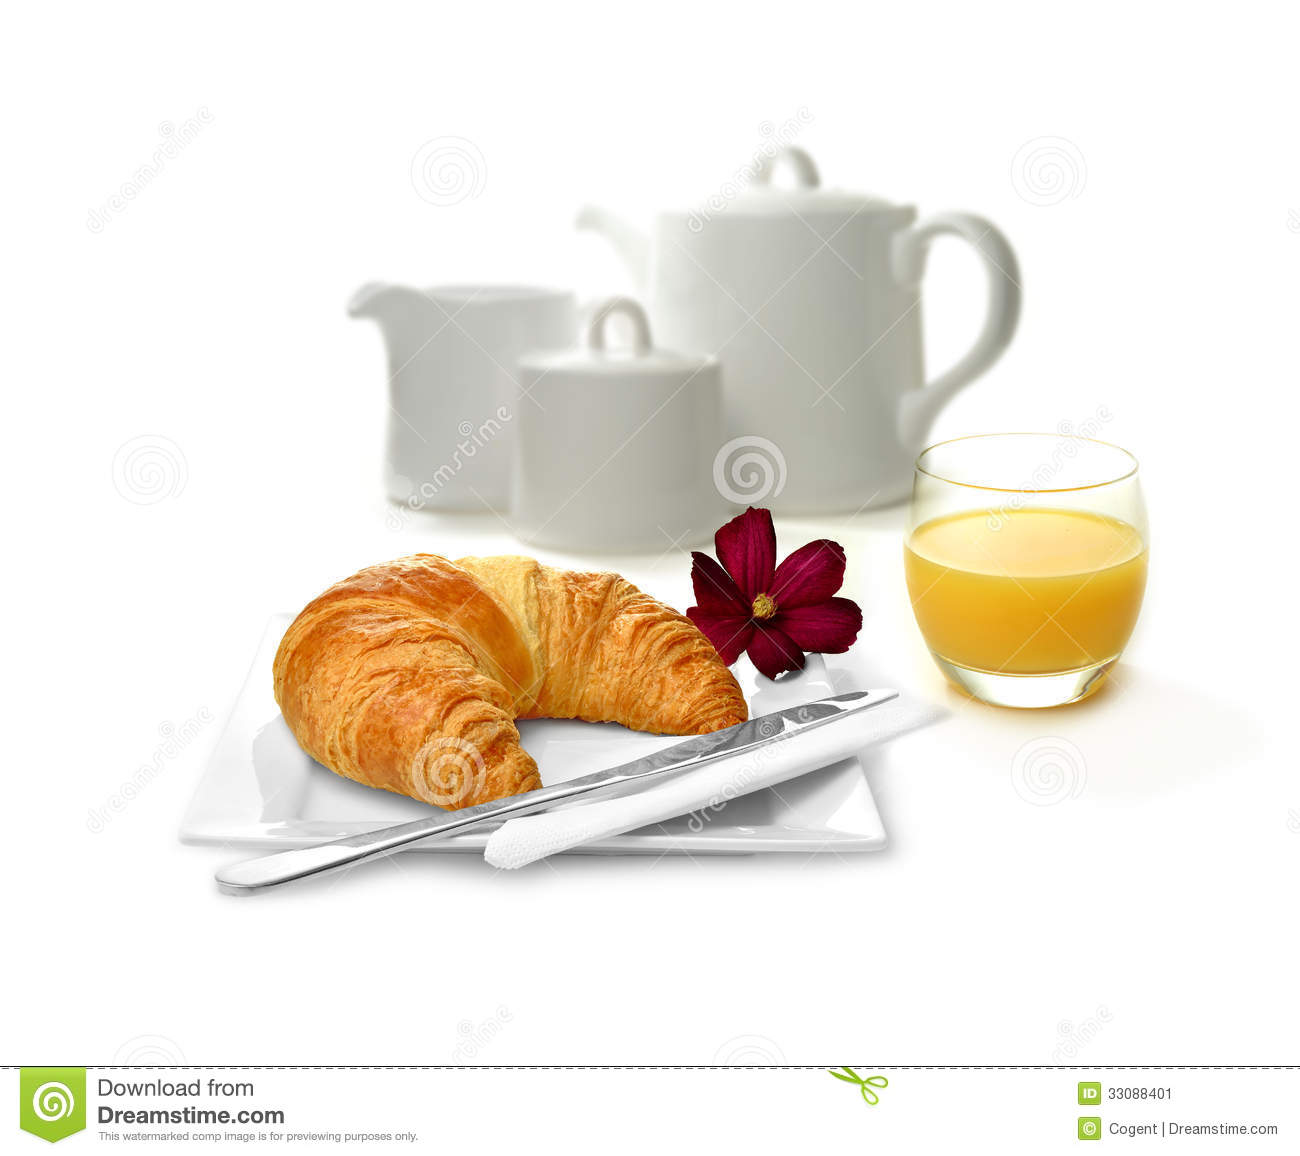 Continental Breakfast Stock Image   Image  33088401